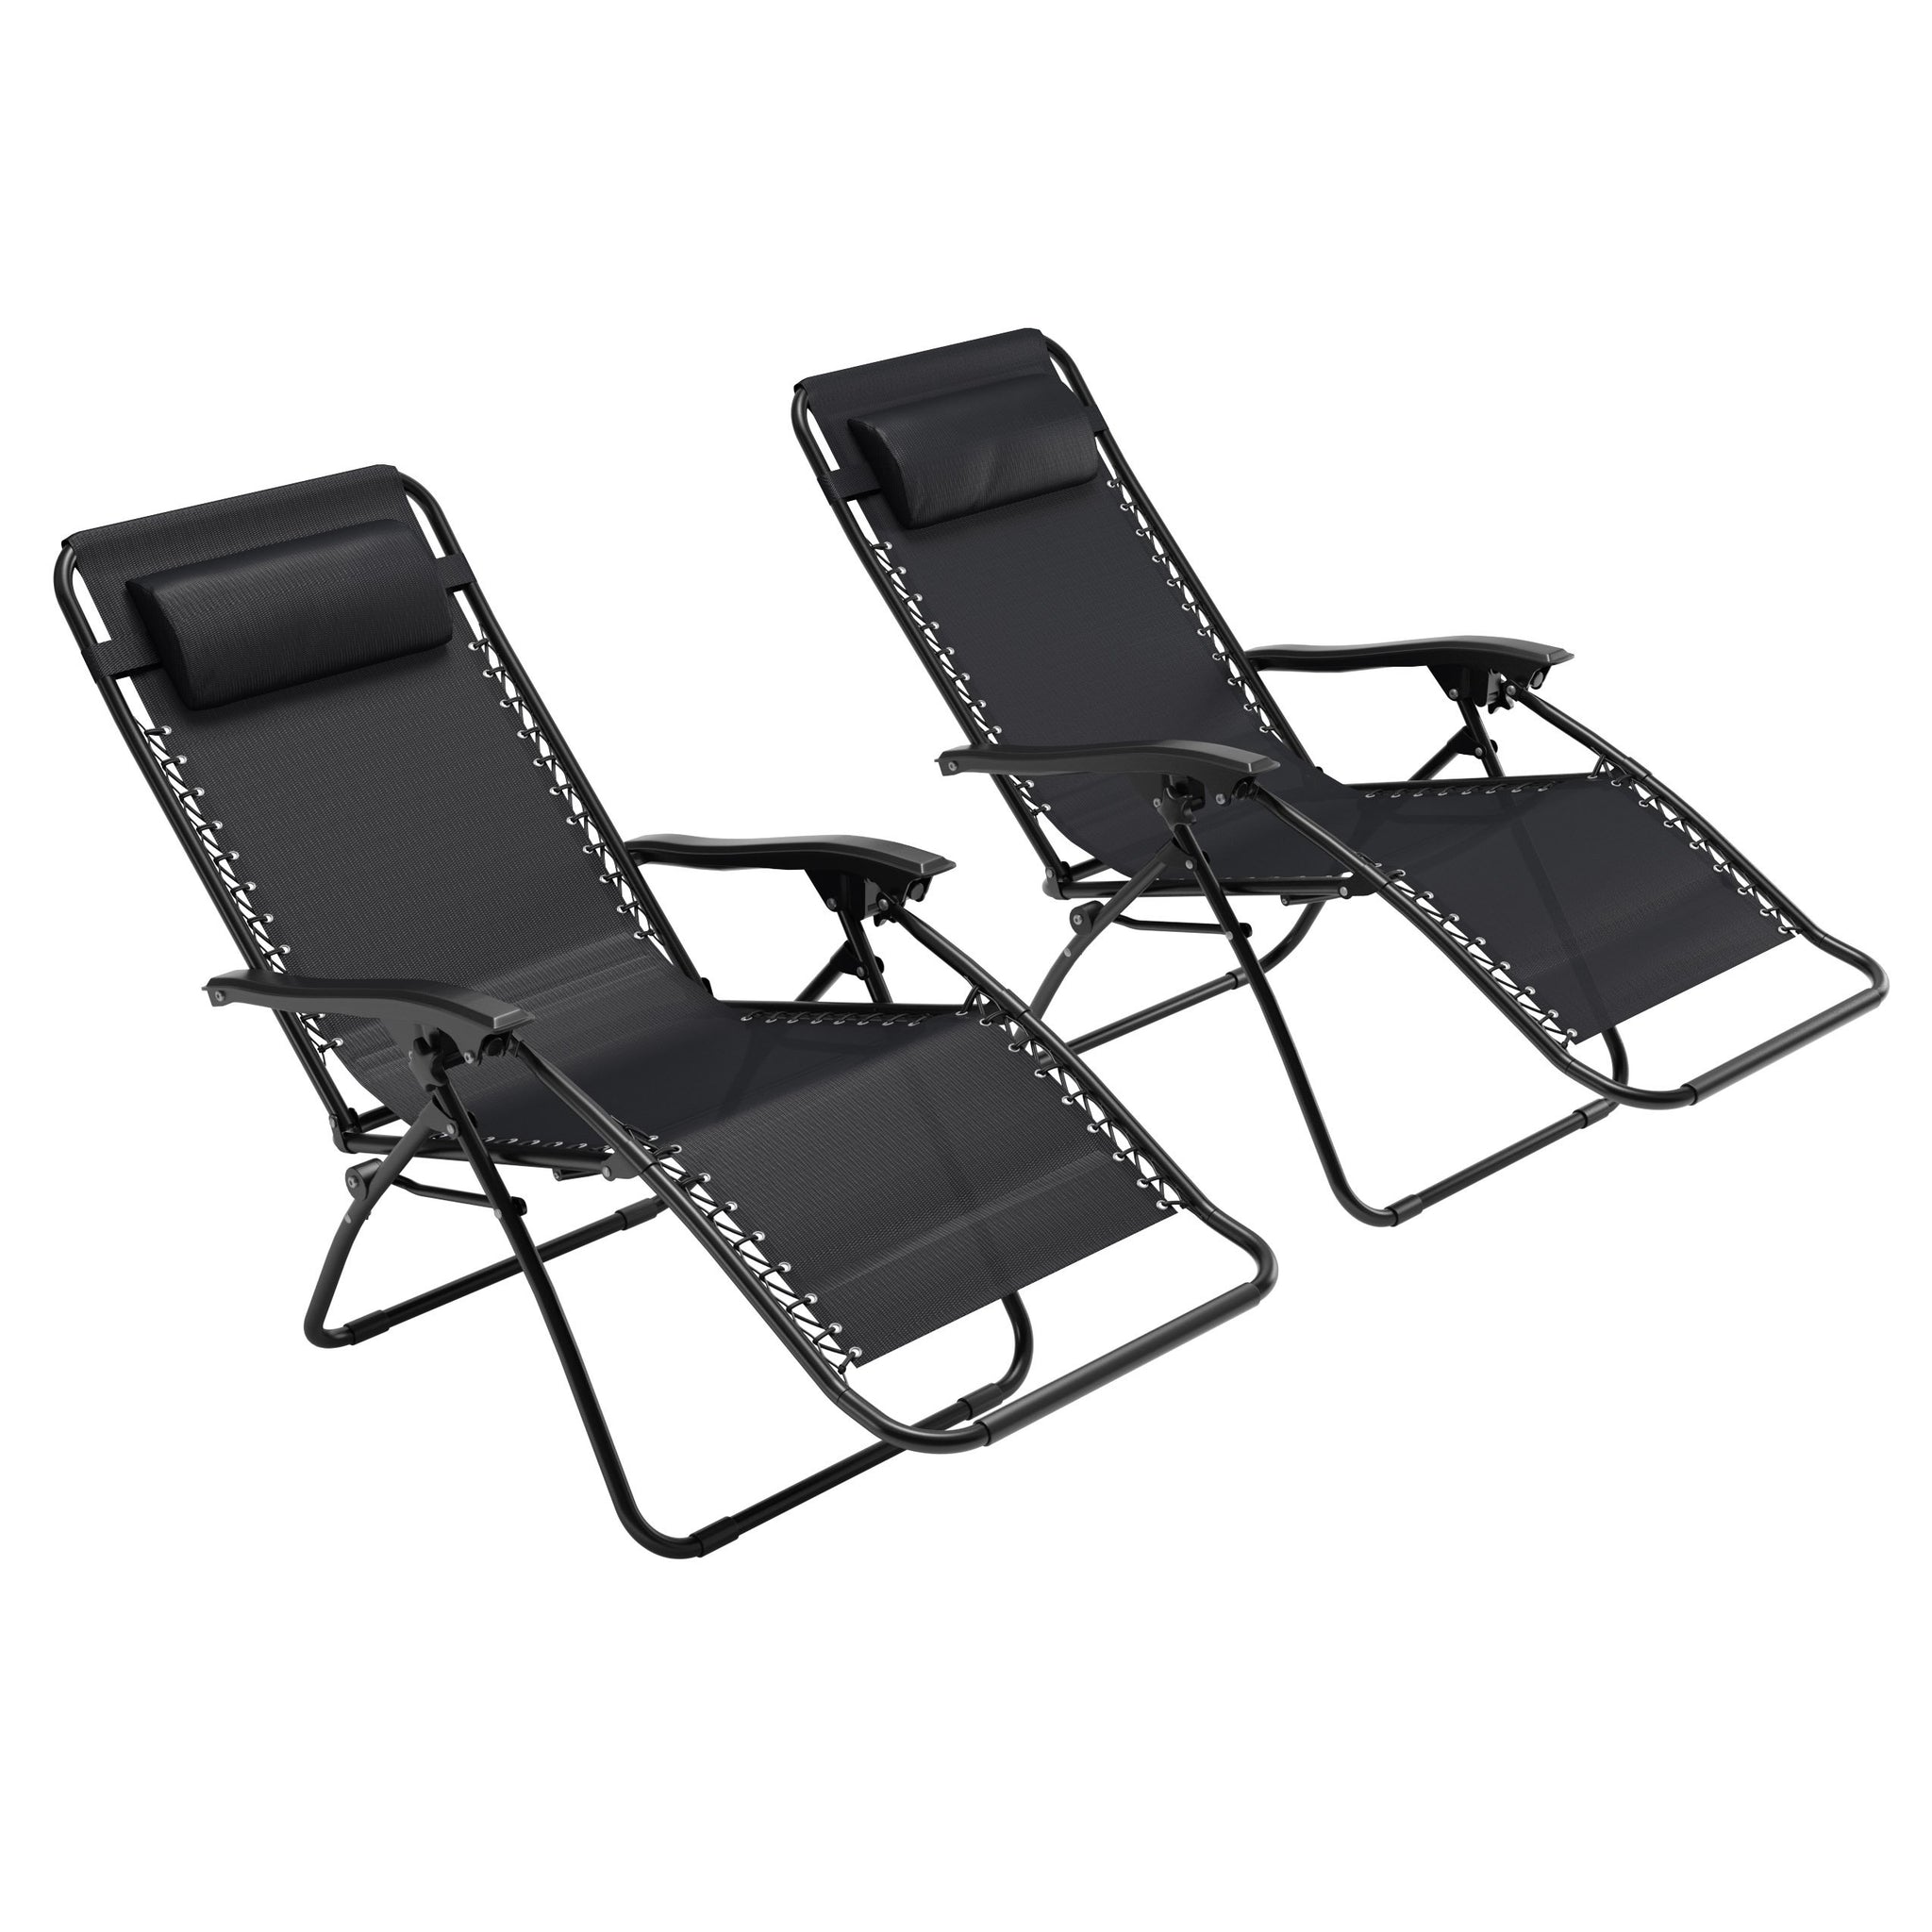 Riverside Textured Zero Gravity Patio Lounger Set Of 2 Clearance